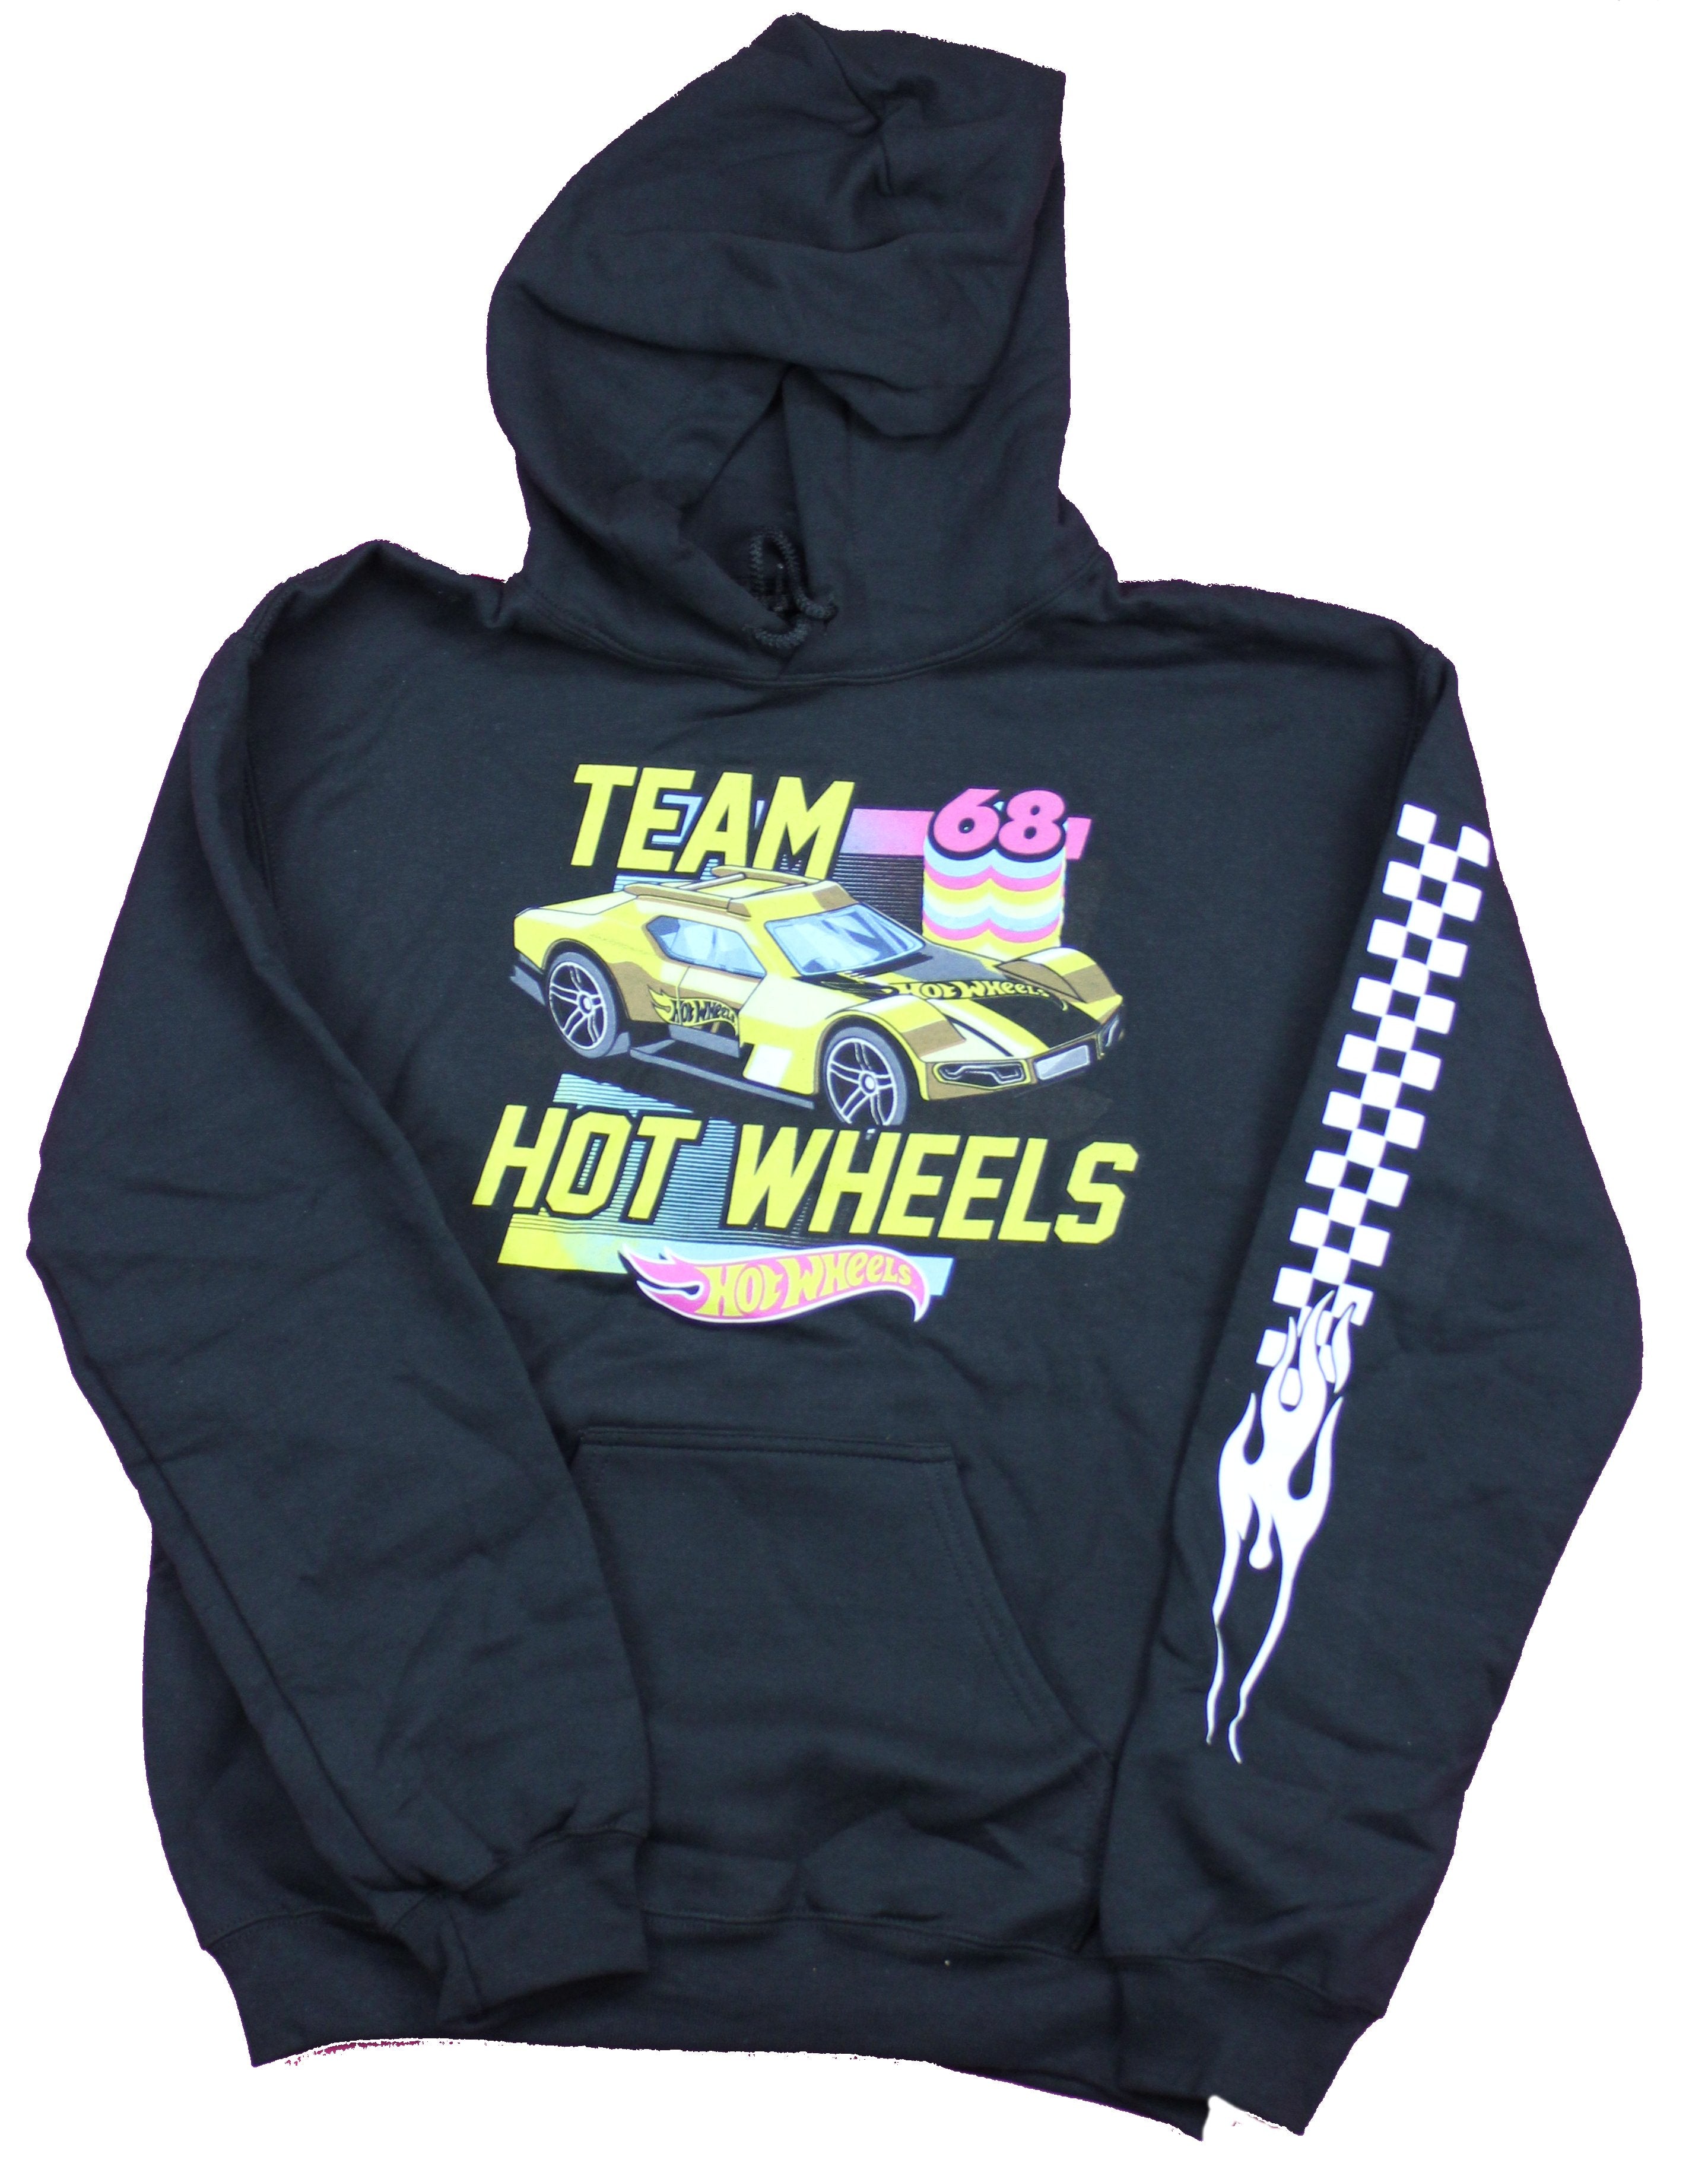 Hot Wheels Pullover Hoodie - Team 68 Race Car Checkered Sleeve Image